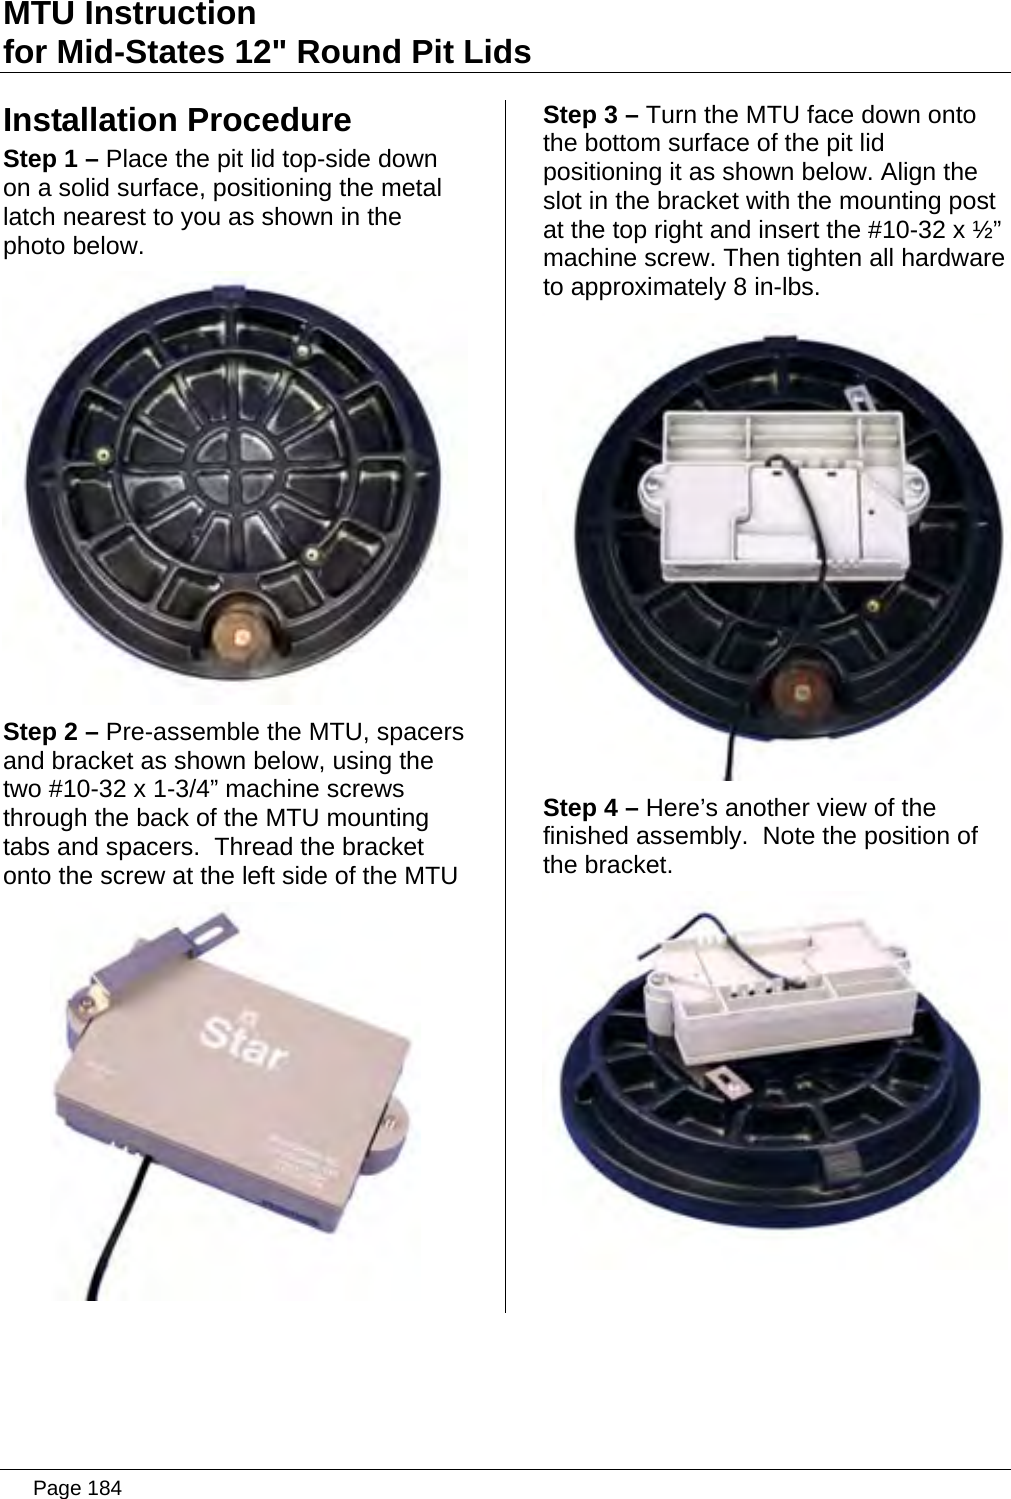 MTU Instruction for Mid-States 12&quot; Round Pit Lids Installation Procedure Step 1 – Place the pit lid top-side down on a solid surface, positioning the metal latch nearest to you as shown in the photo below.  Step 2 – Pre-assemble the MTU, spacers and bracket as shown below, using the two #10-32 x 1-3/4” machine screws through the back of the MTU mounting tabs and spacers.  Thread the bracket onto the screw at the left side of the MTU  Step 3 – Turn the MTU face down onto the bottom surface of the pit lid positioning it as shown below. Align the slot in the bracket with the mounting post at the top right and insert the #10-32 x ½” machine screw. Then tighten all hardware to approximately 8 in-lbs.  Step 4 – Here’s another view of the finished assembly.  Note the position of the bracket.    Page 184